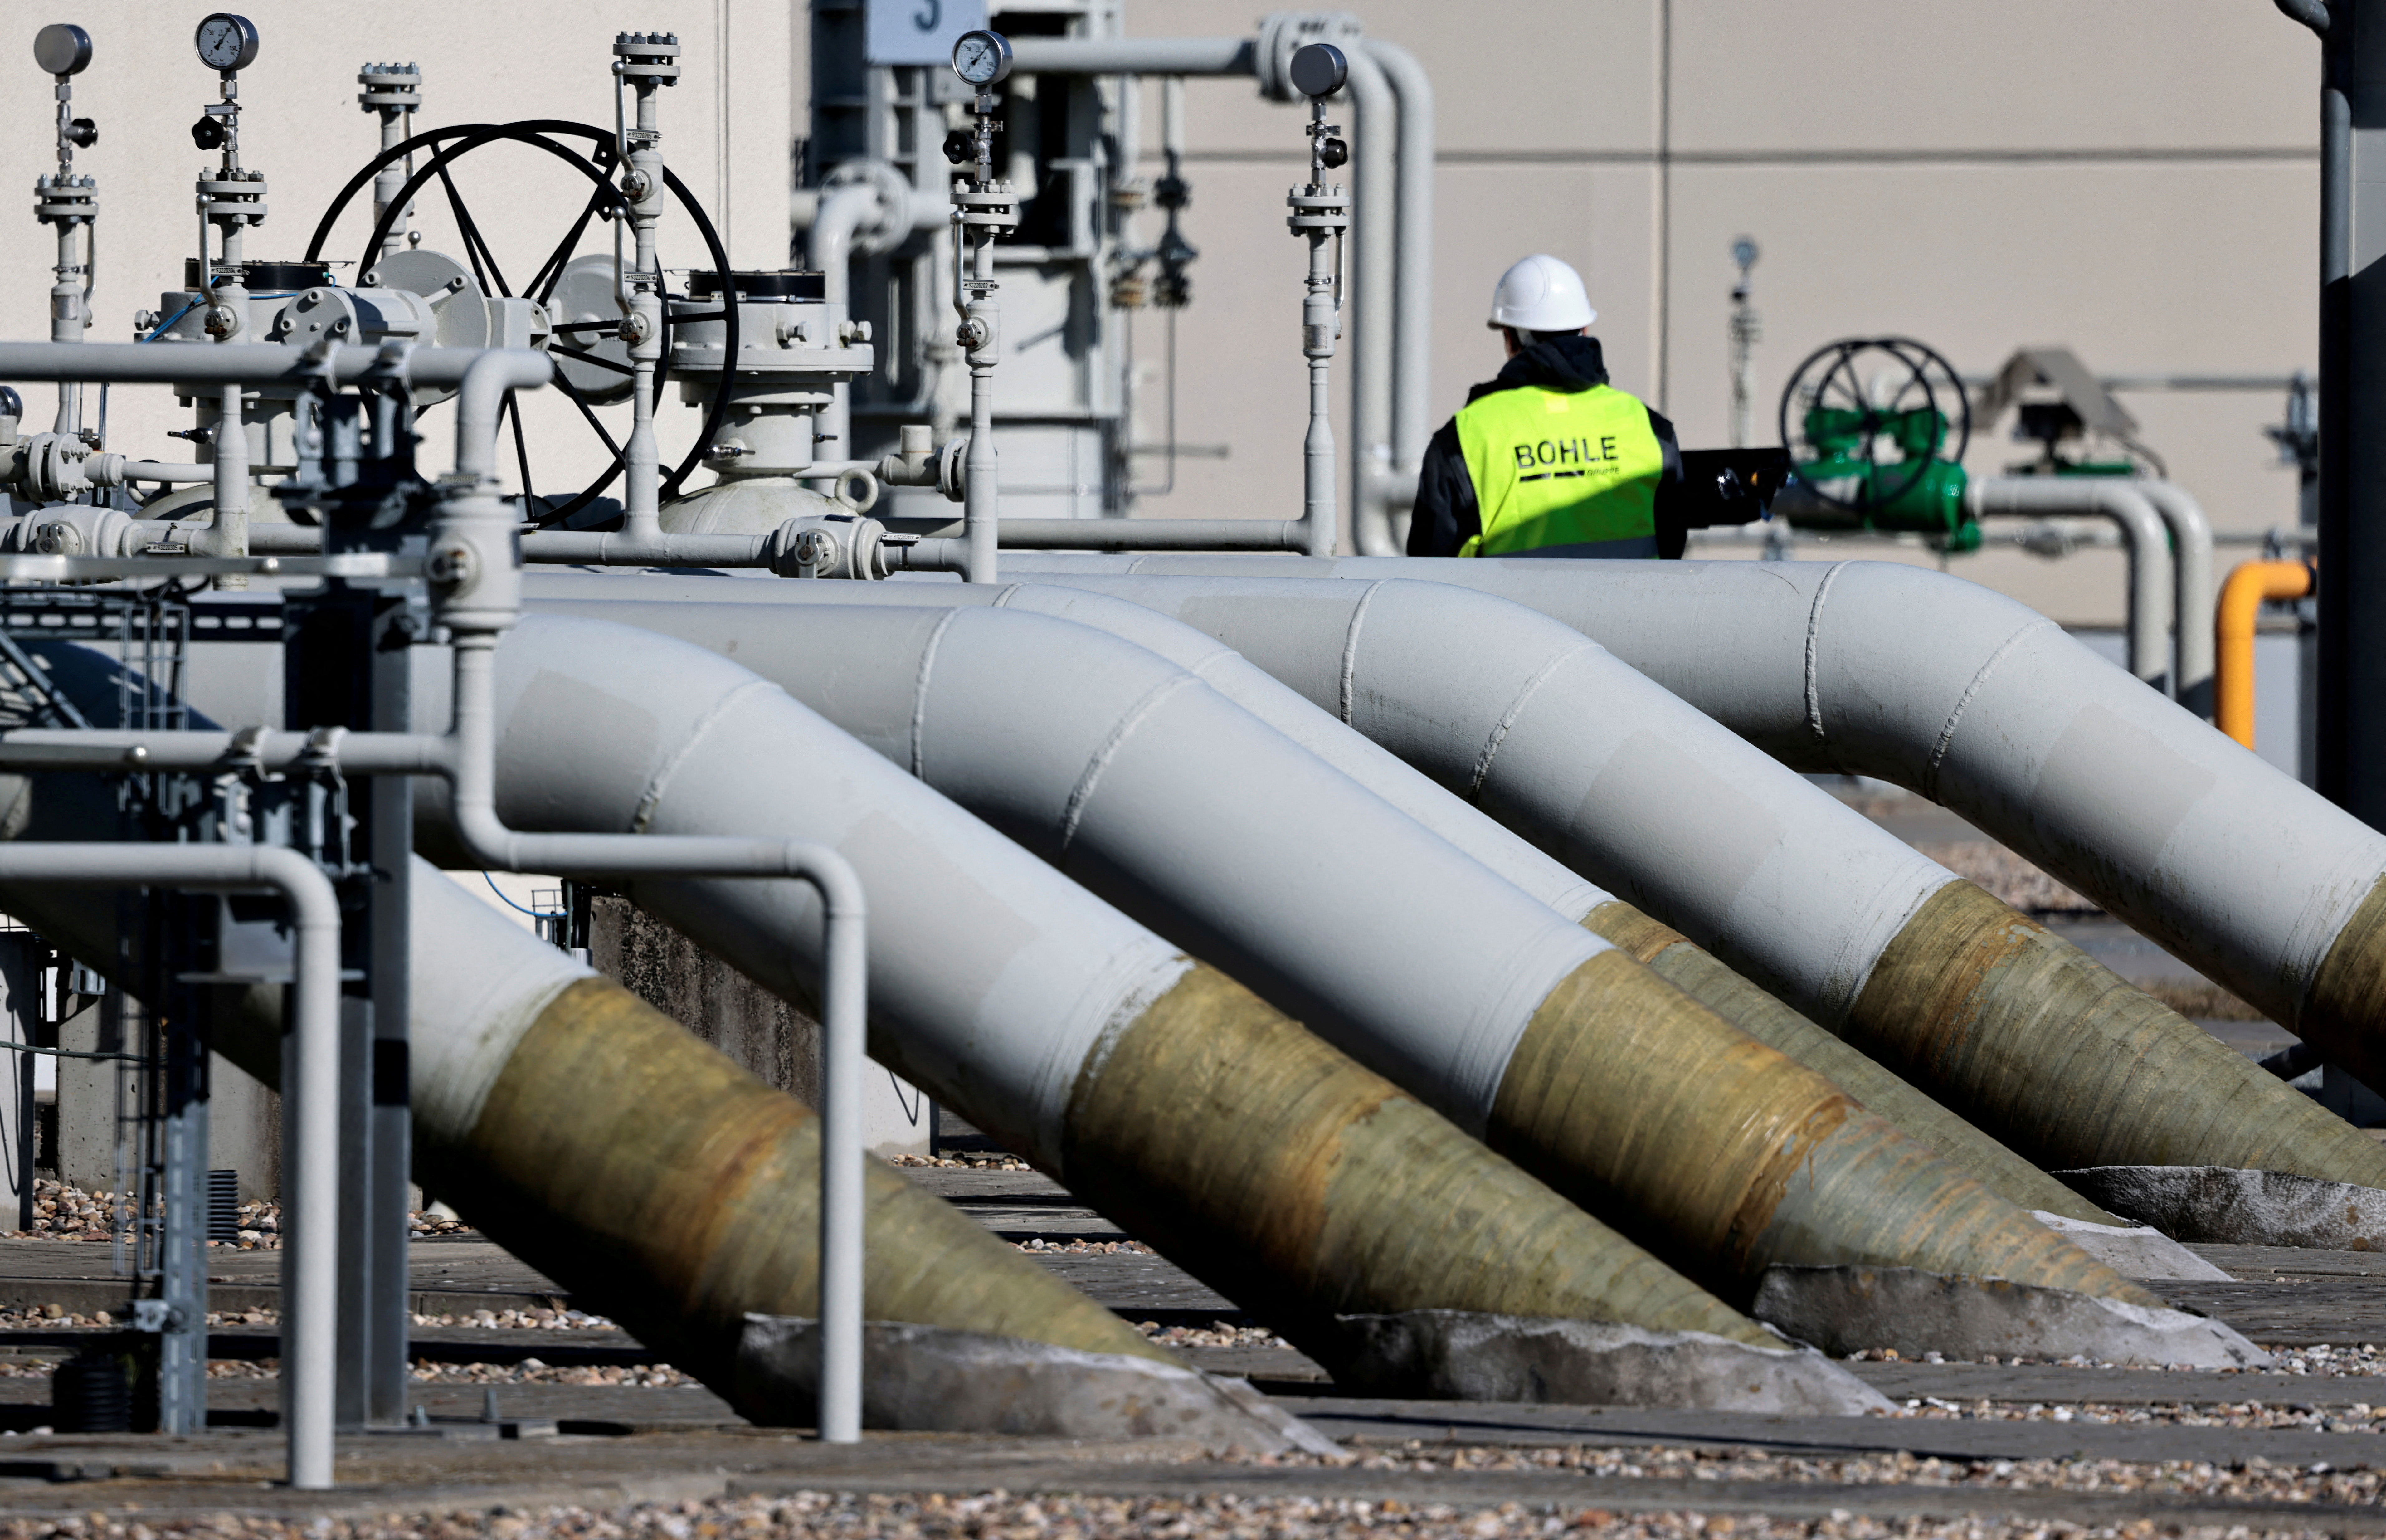 image Russia scraps gas pipeline reopening, stoking European fuel fears (Updated)